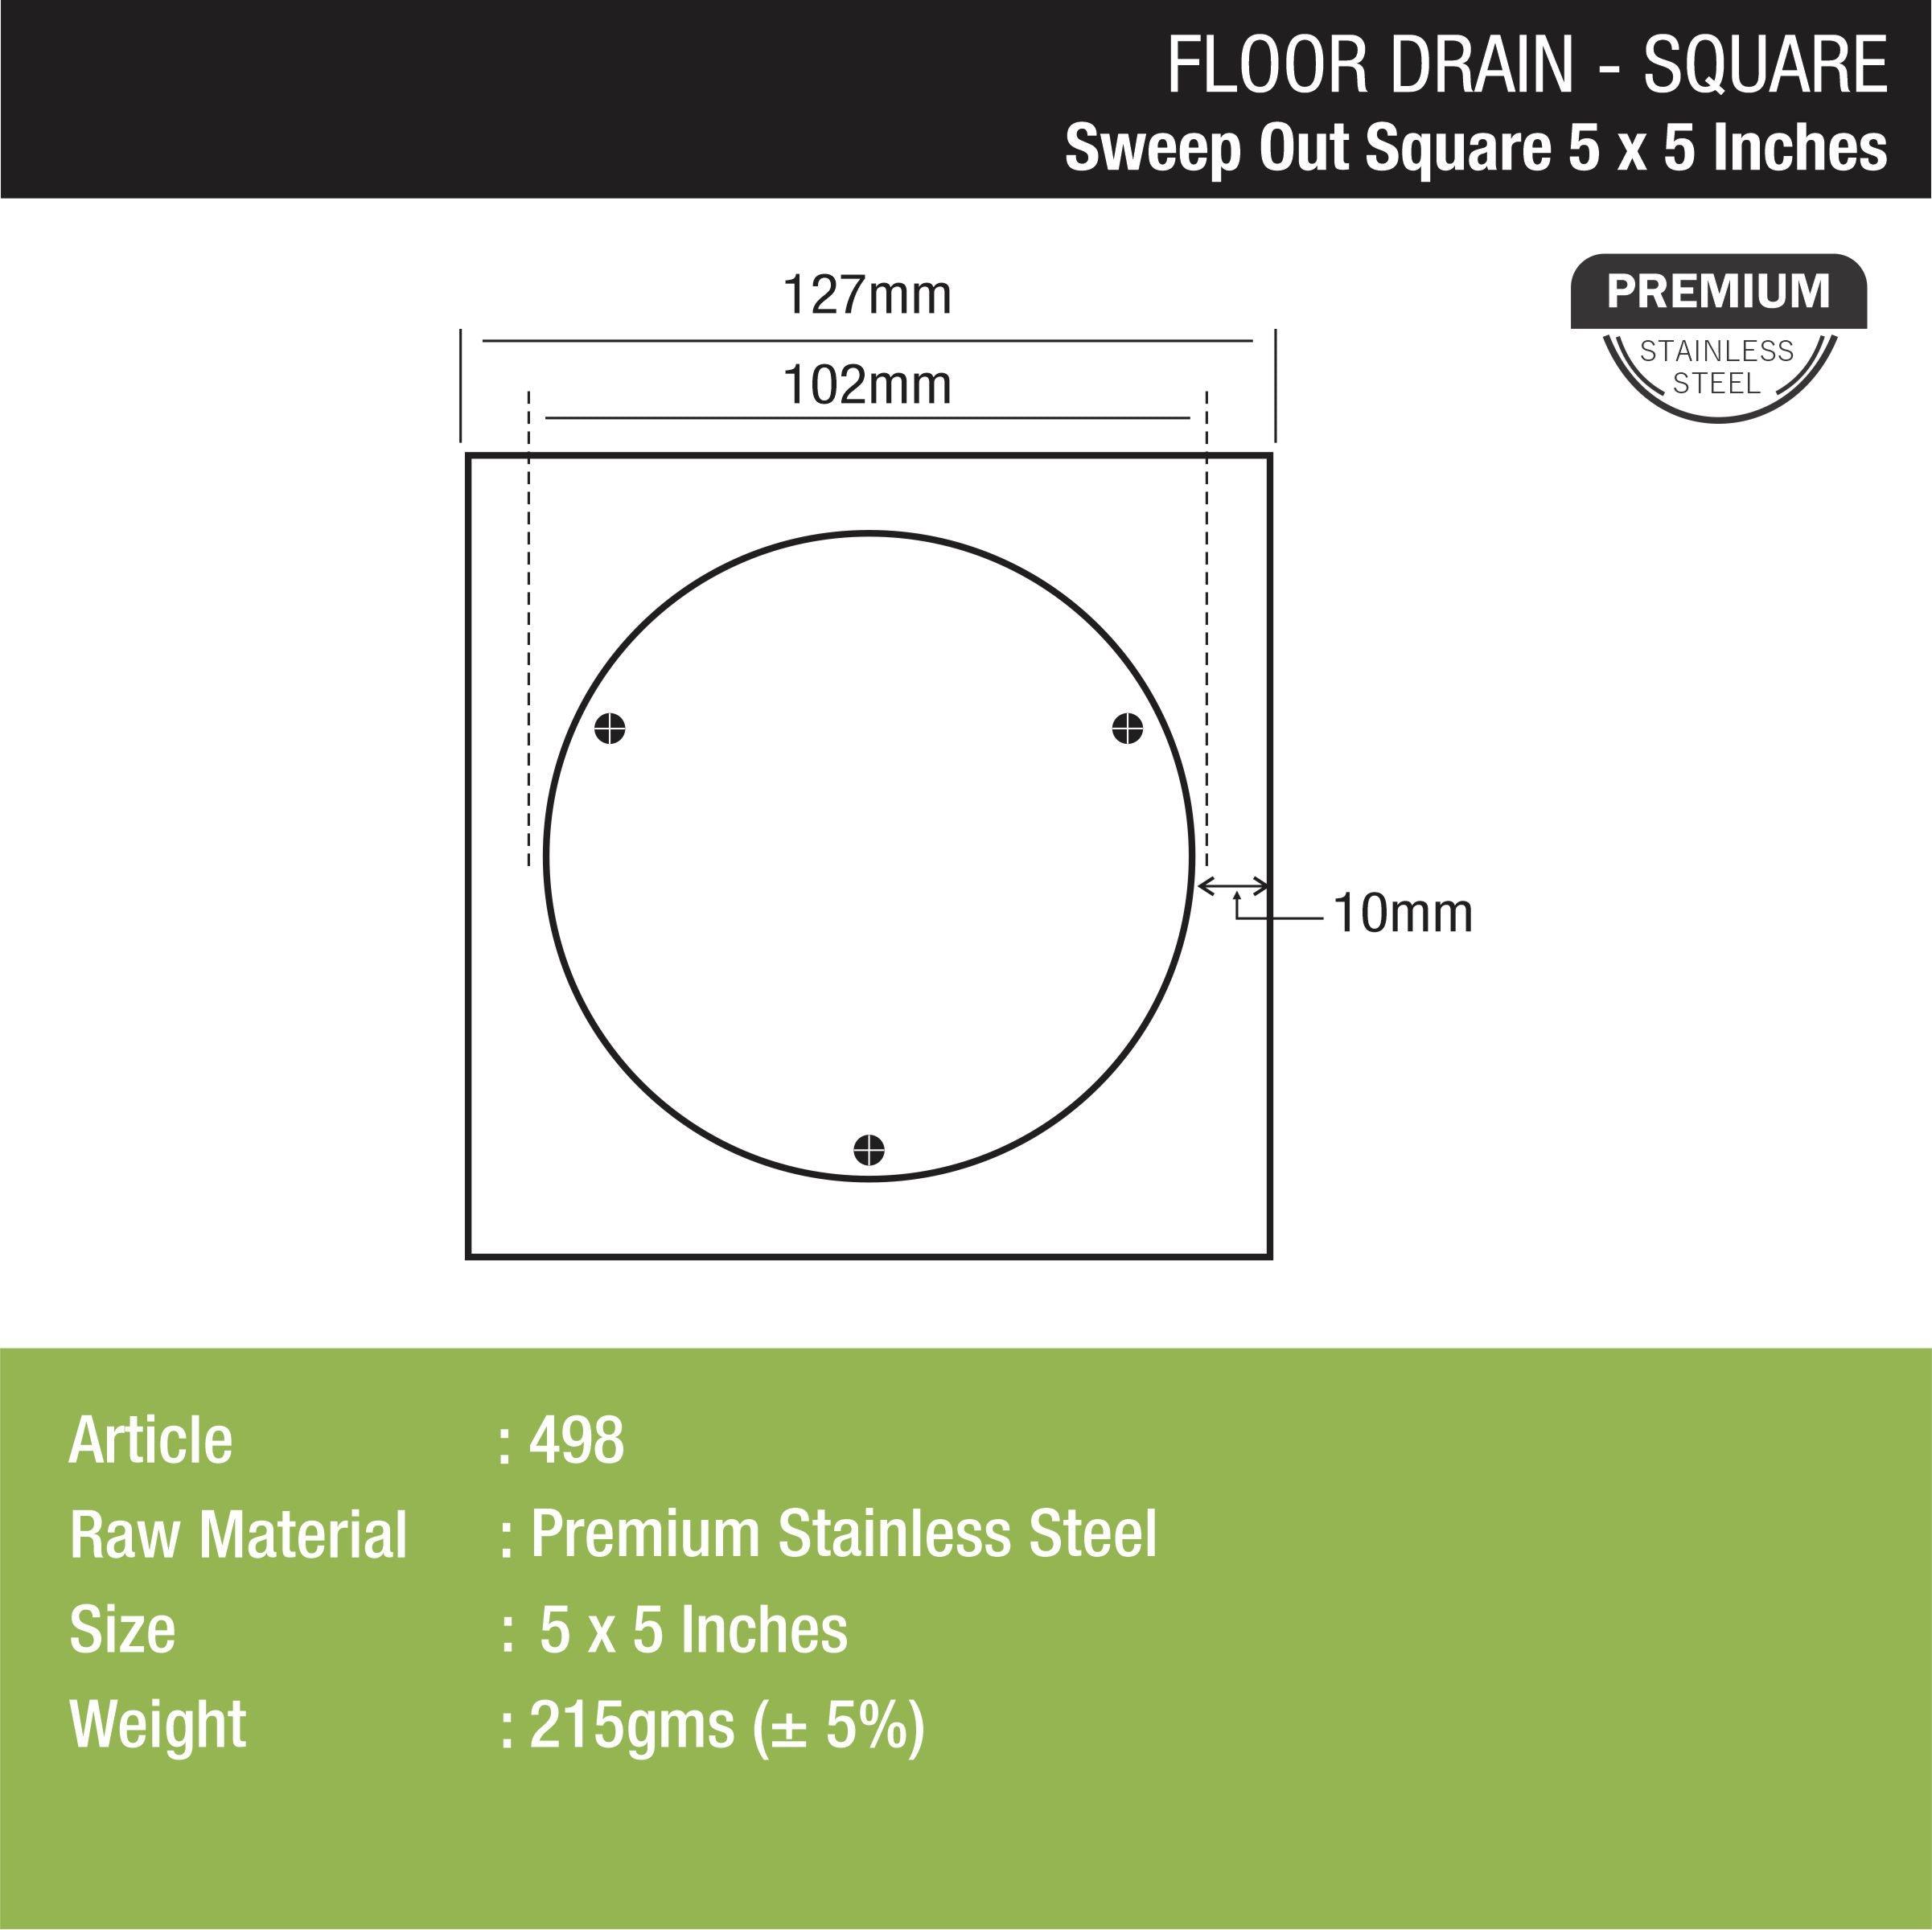 Sweep Out Square Floor Drain (5 x 5 Inches) - LIPKA